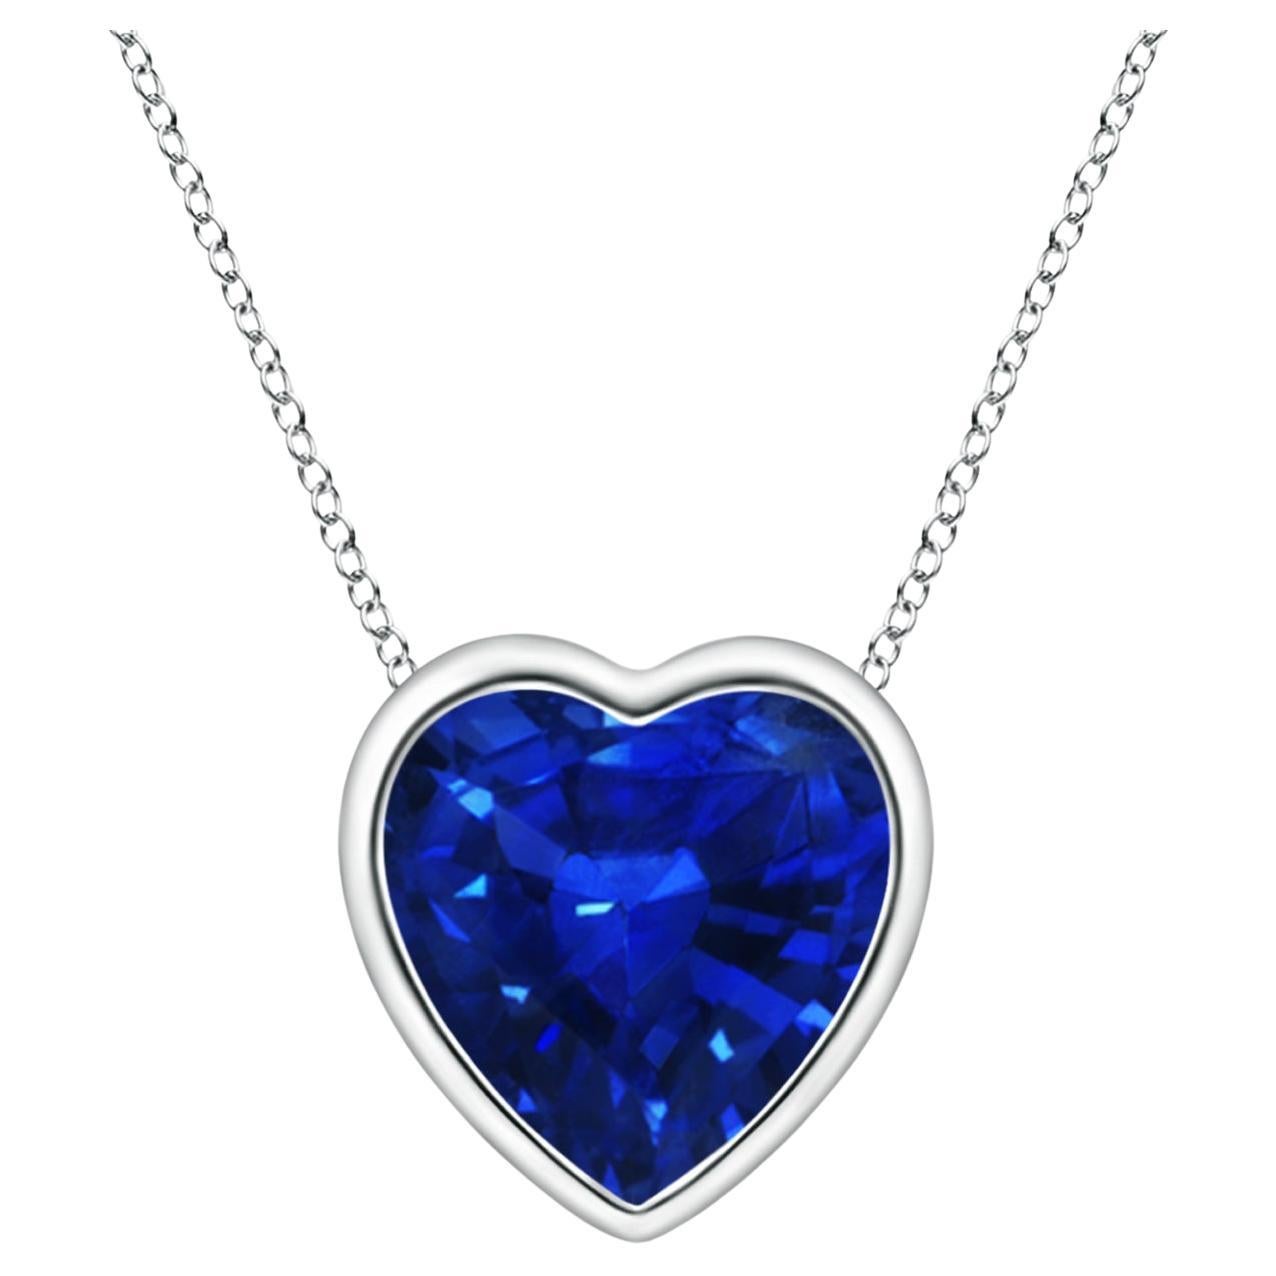 ANGARA Natural Solitaire Heart 0.85ct Blue Sapphire Pendant in 14K White Gold